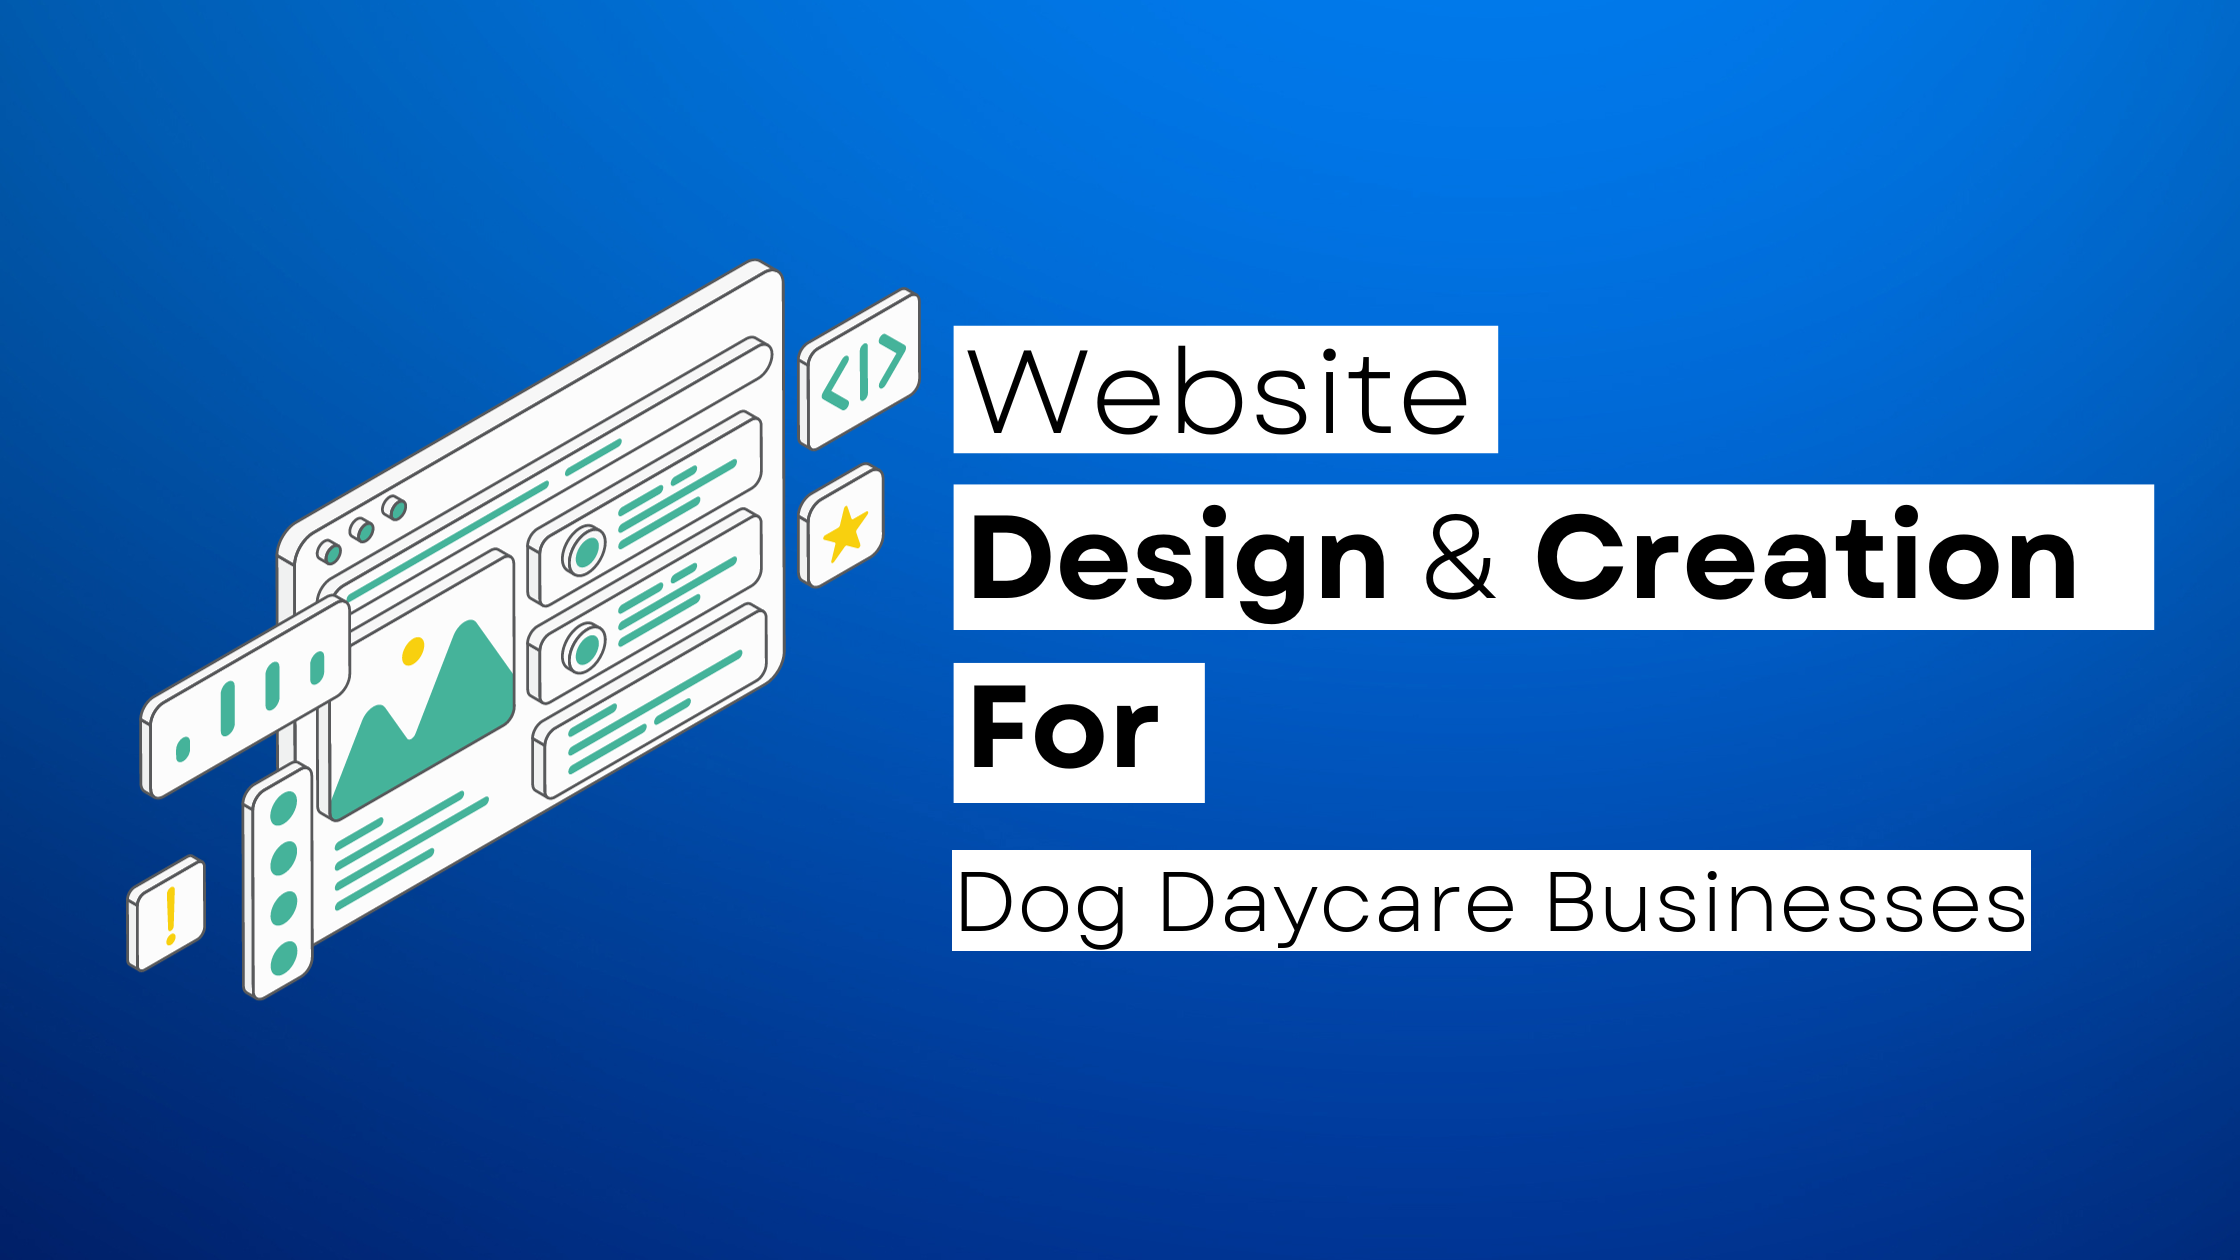 How to start a Dog Daycare website